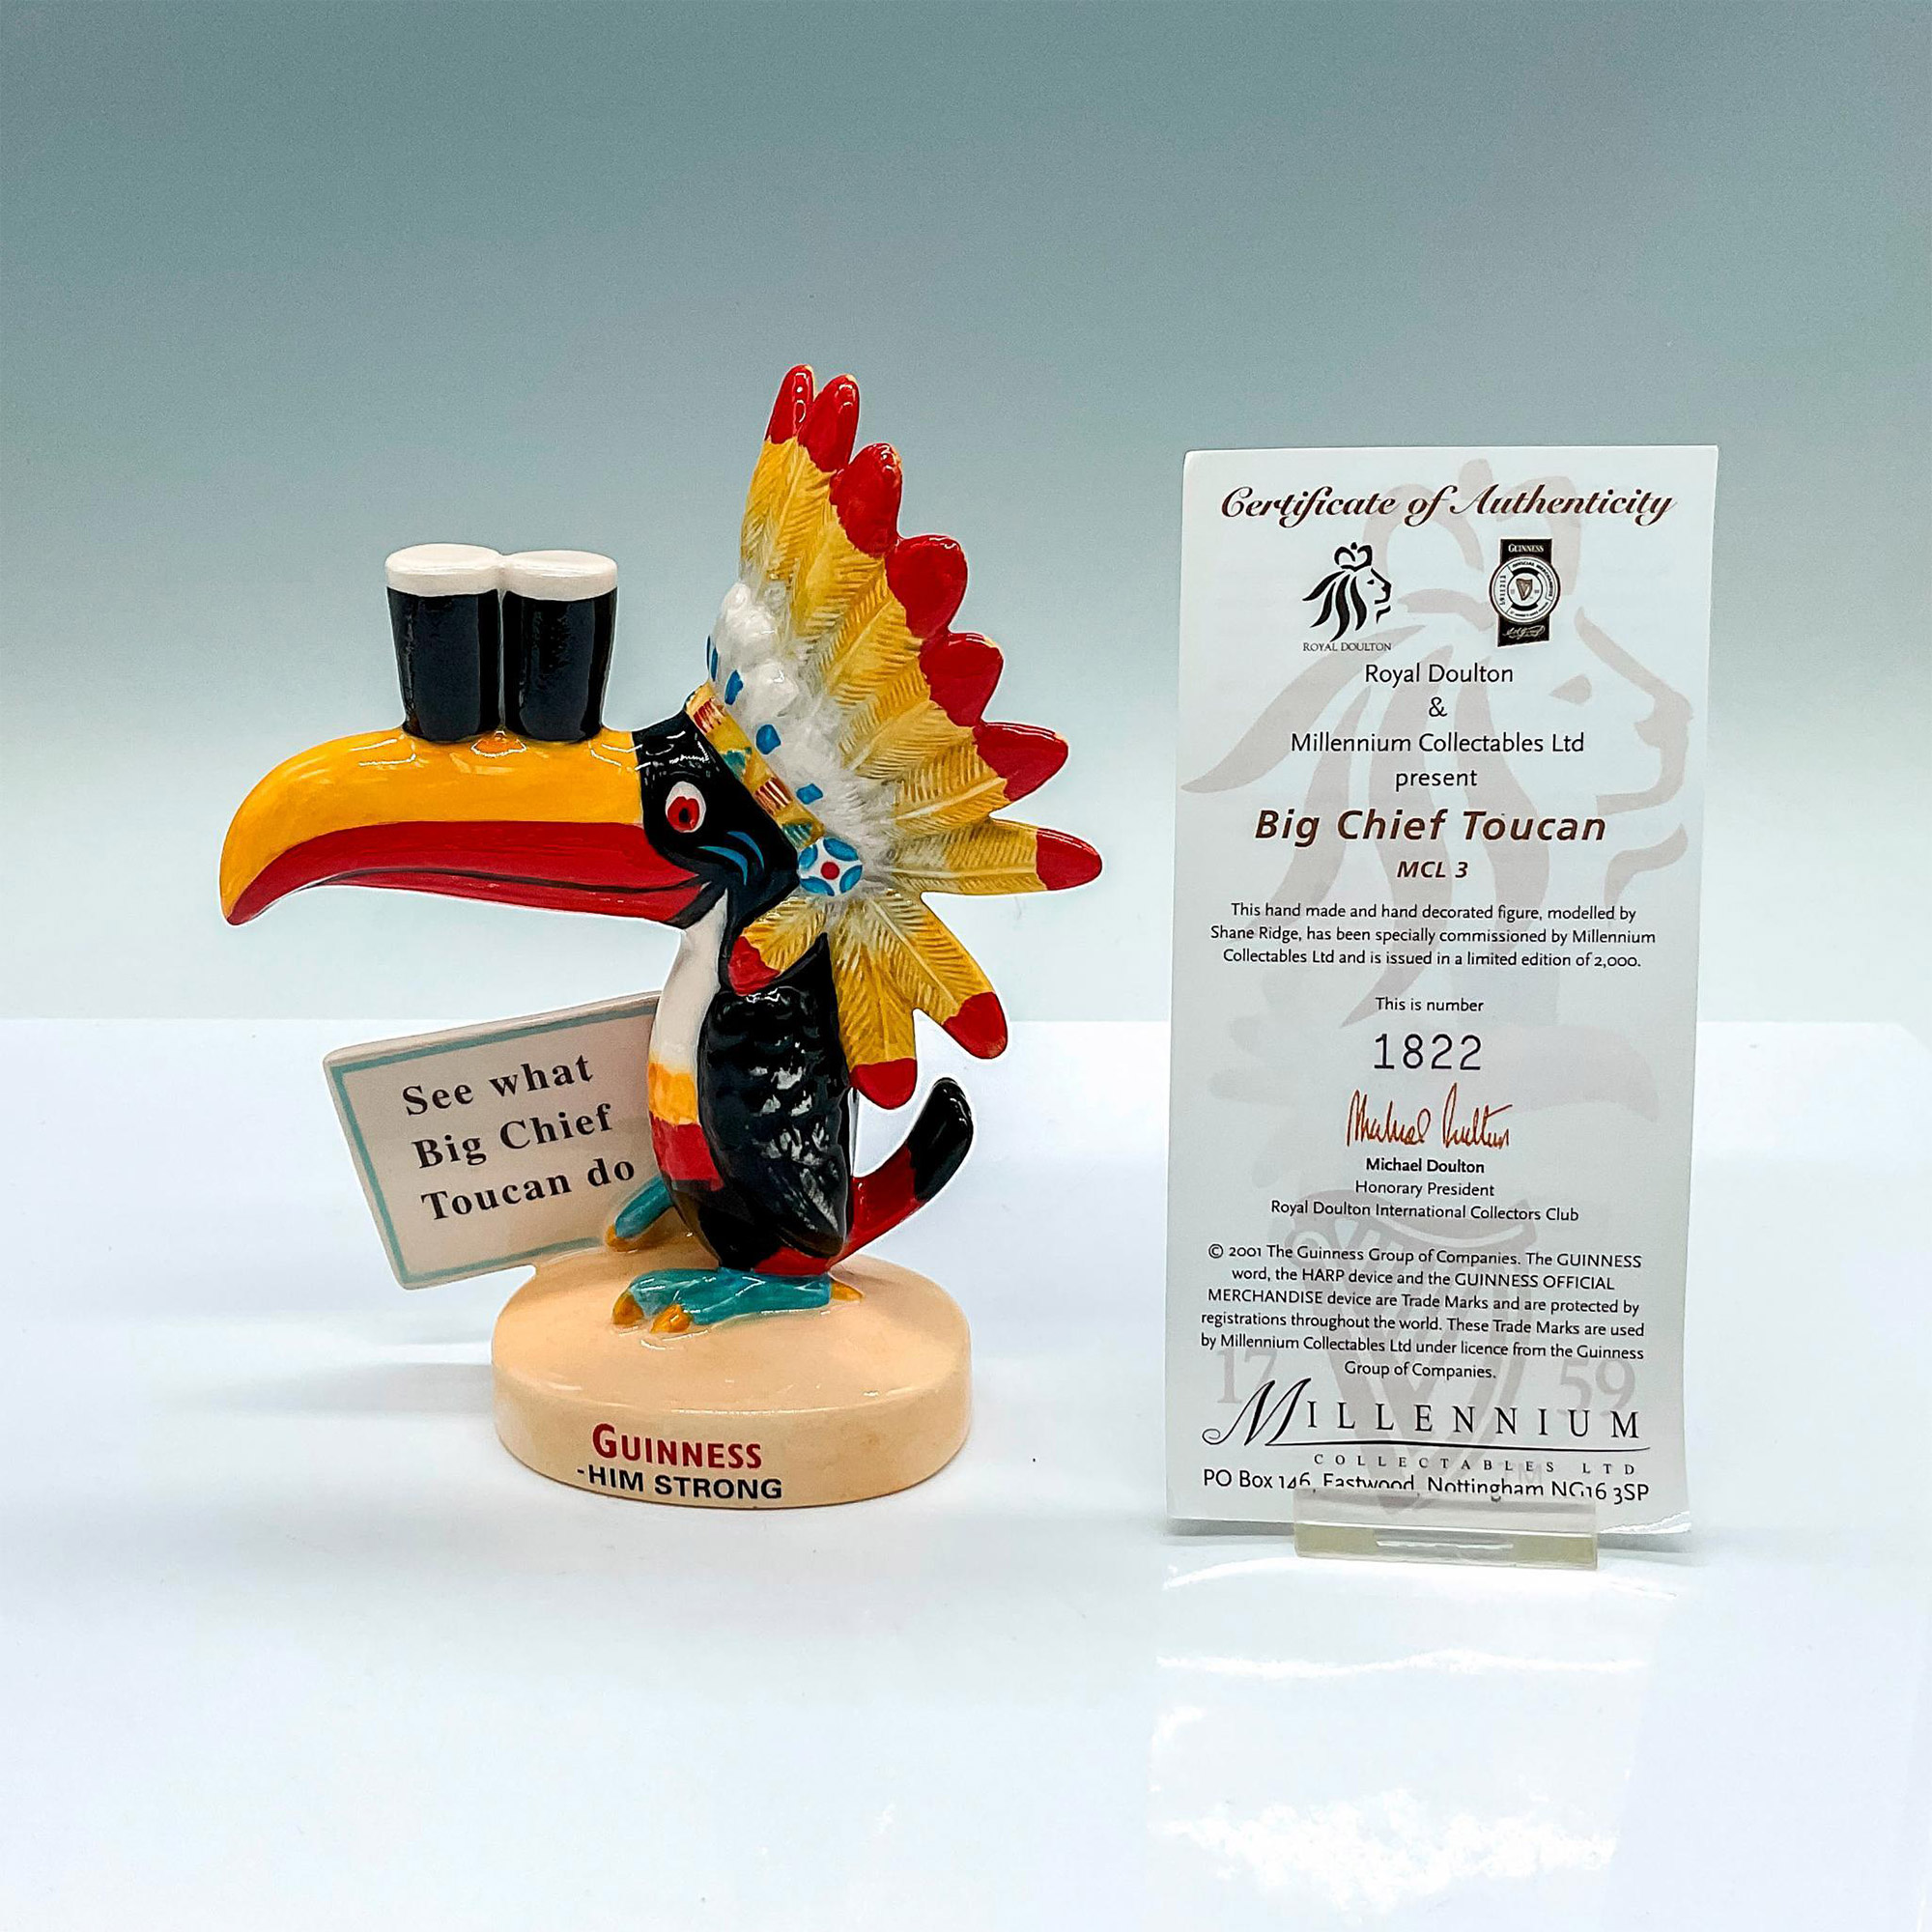 Royal Doulton Figurine, Guinness Big Chief Toucan MCL3 - Image 2 of 3